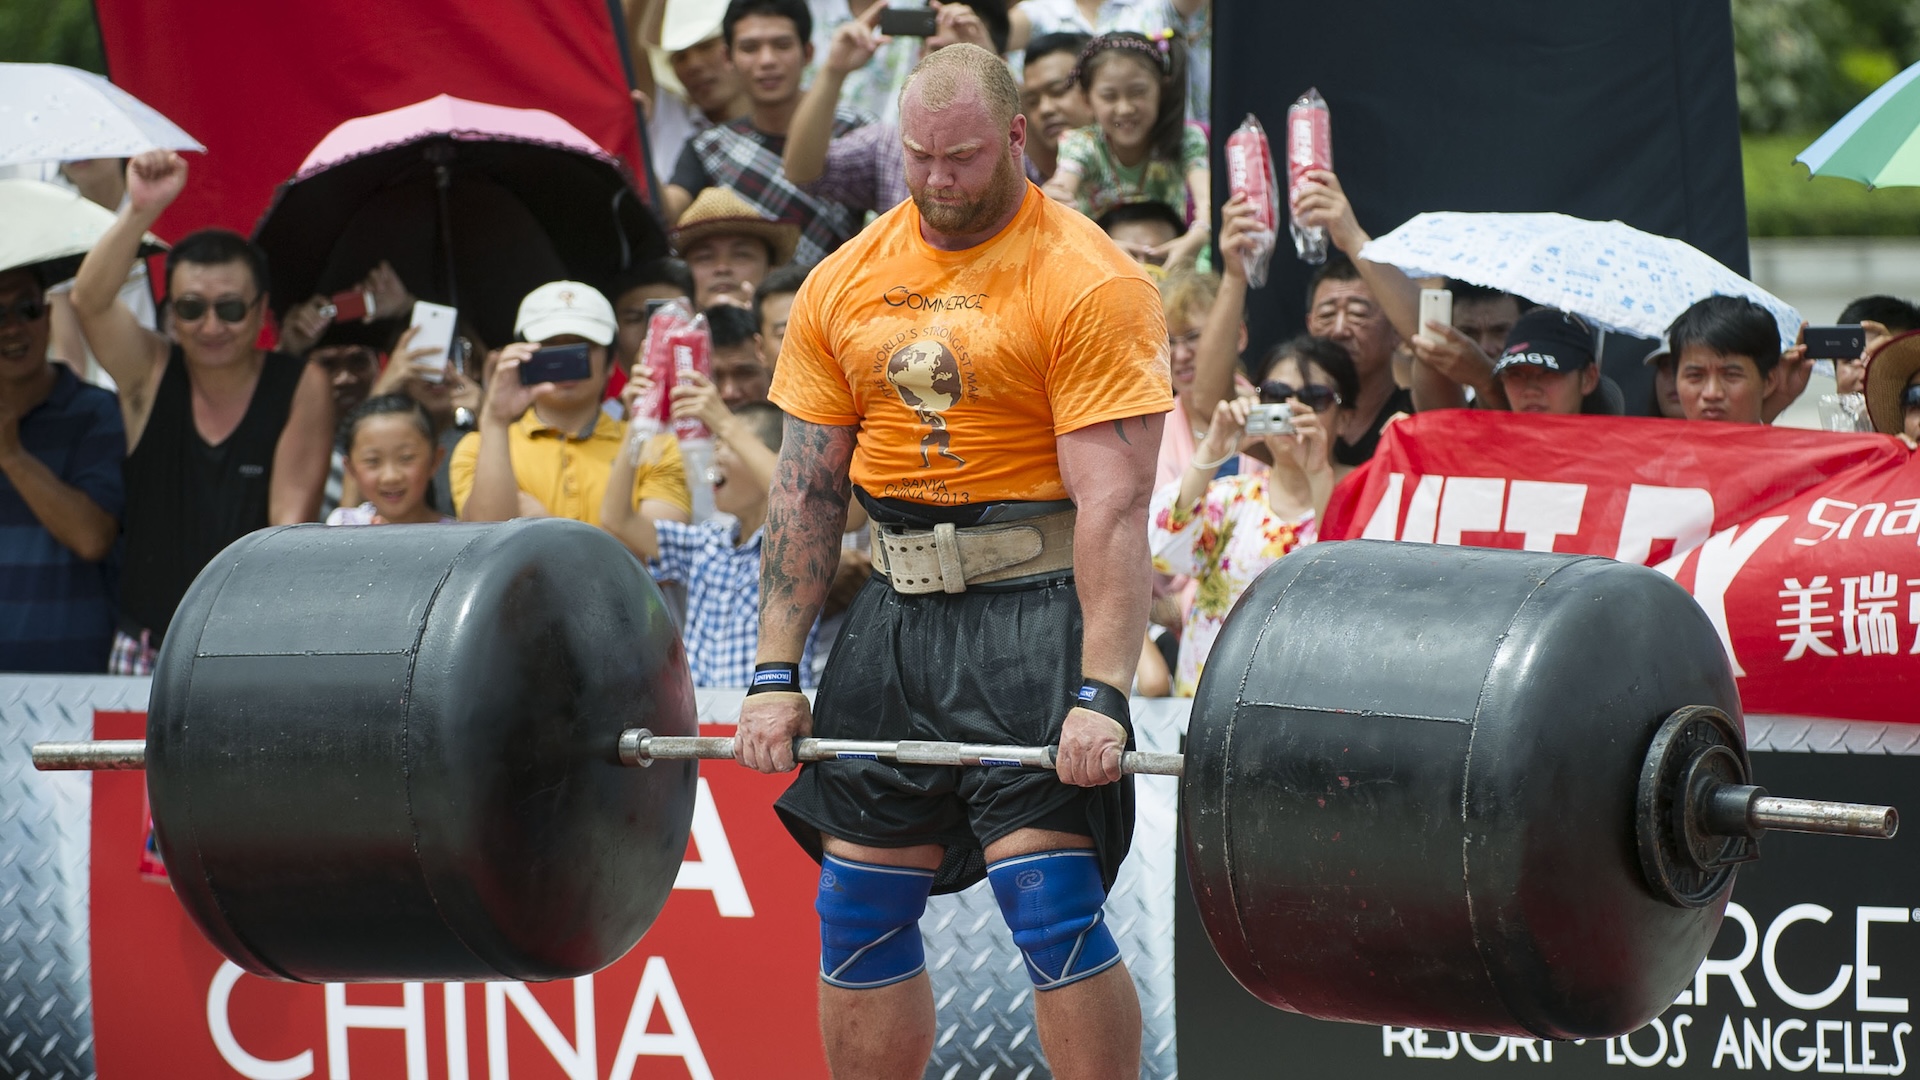  What's the heaviest weight a person can lift? 